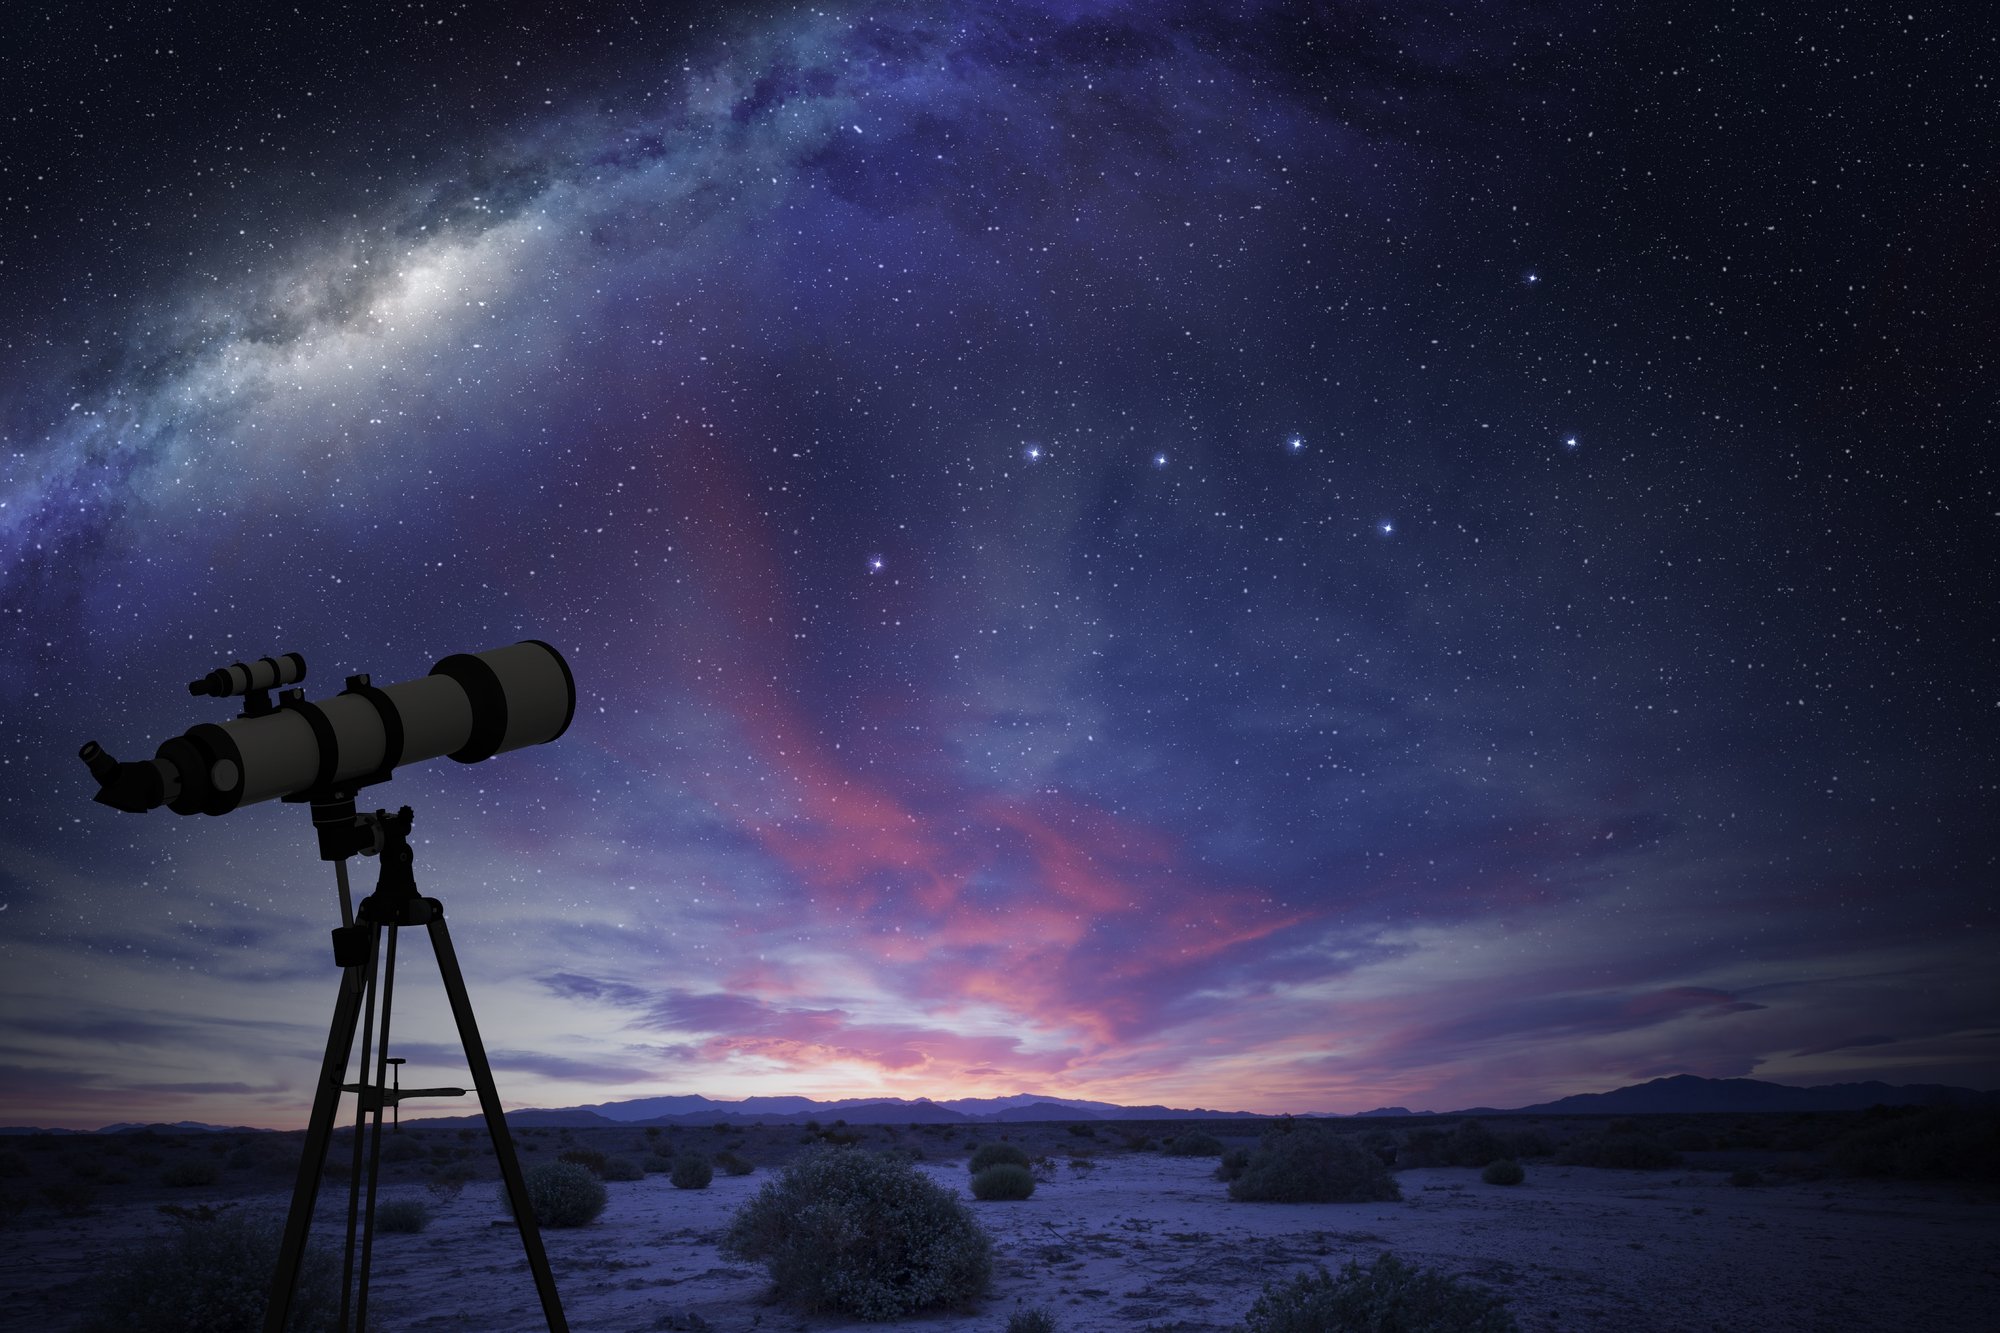 best telescope for viewing planets